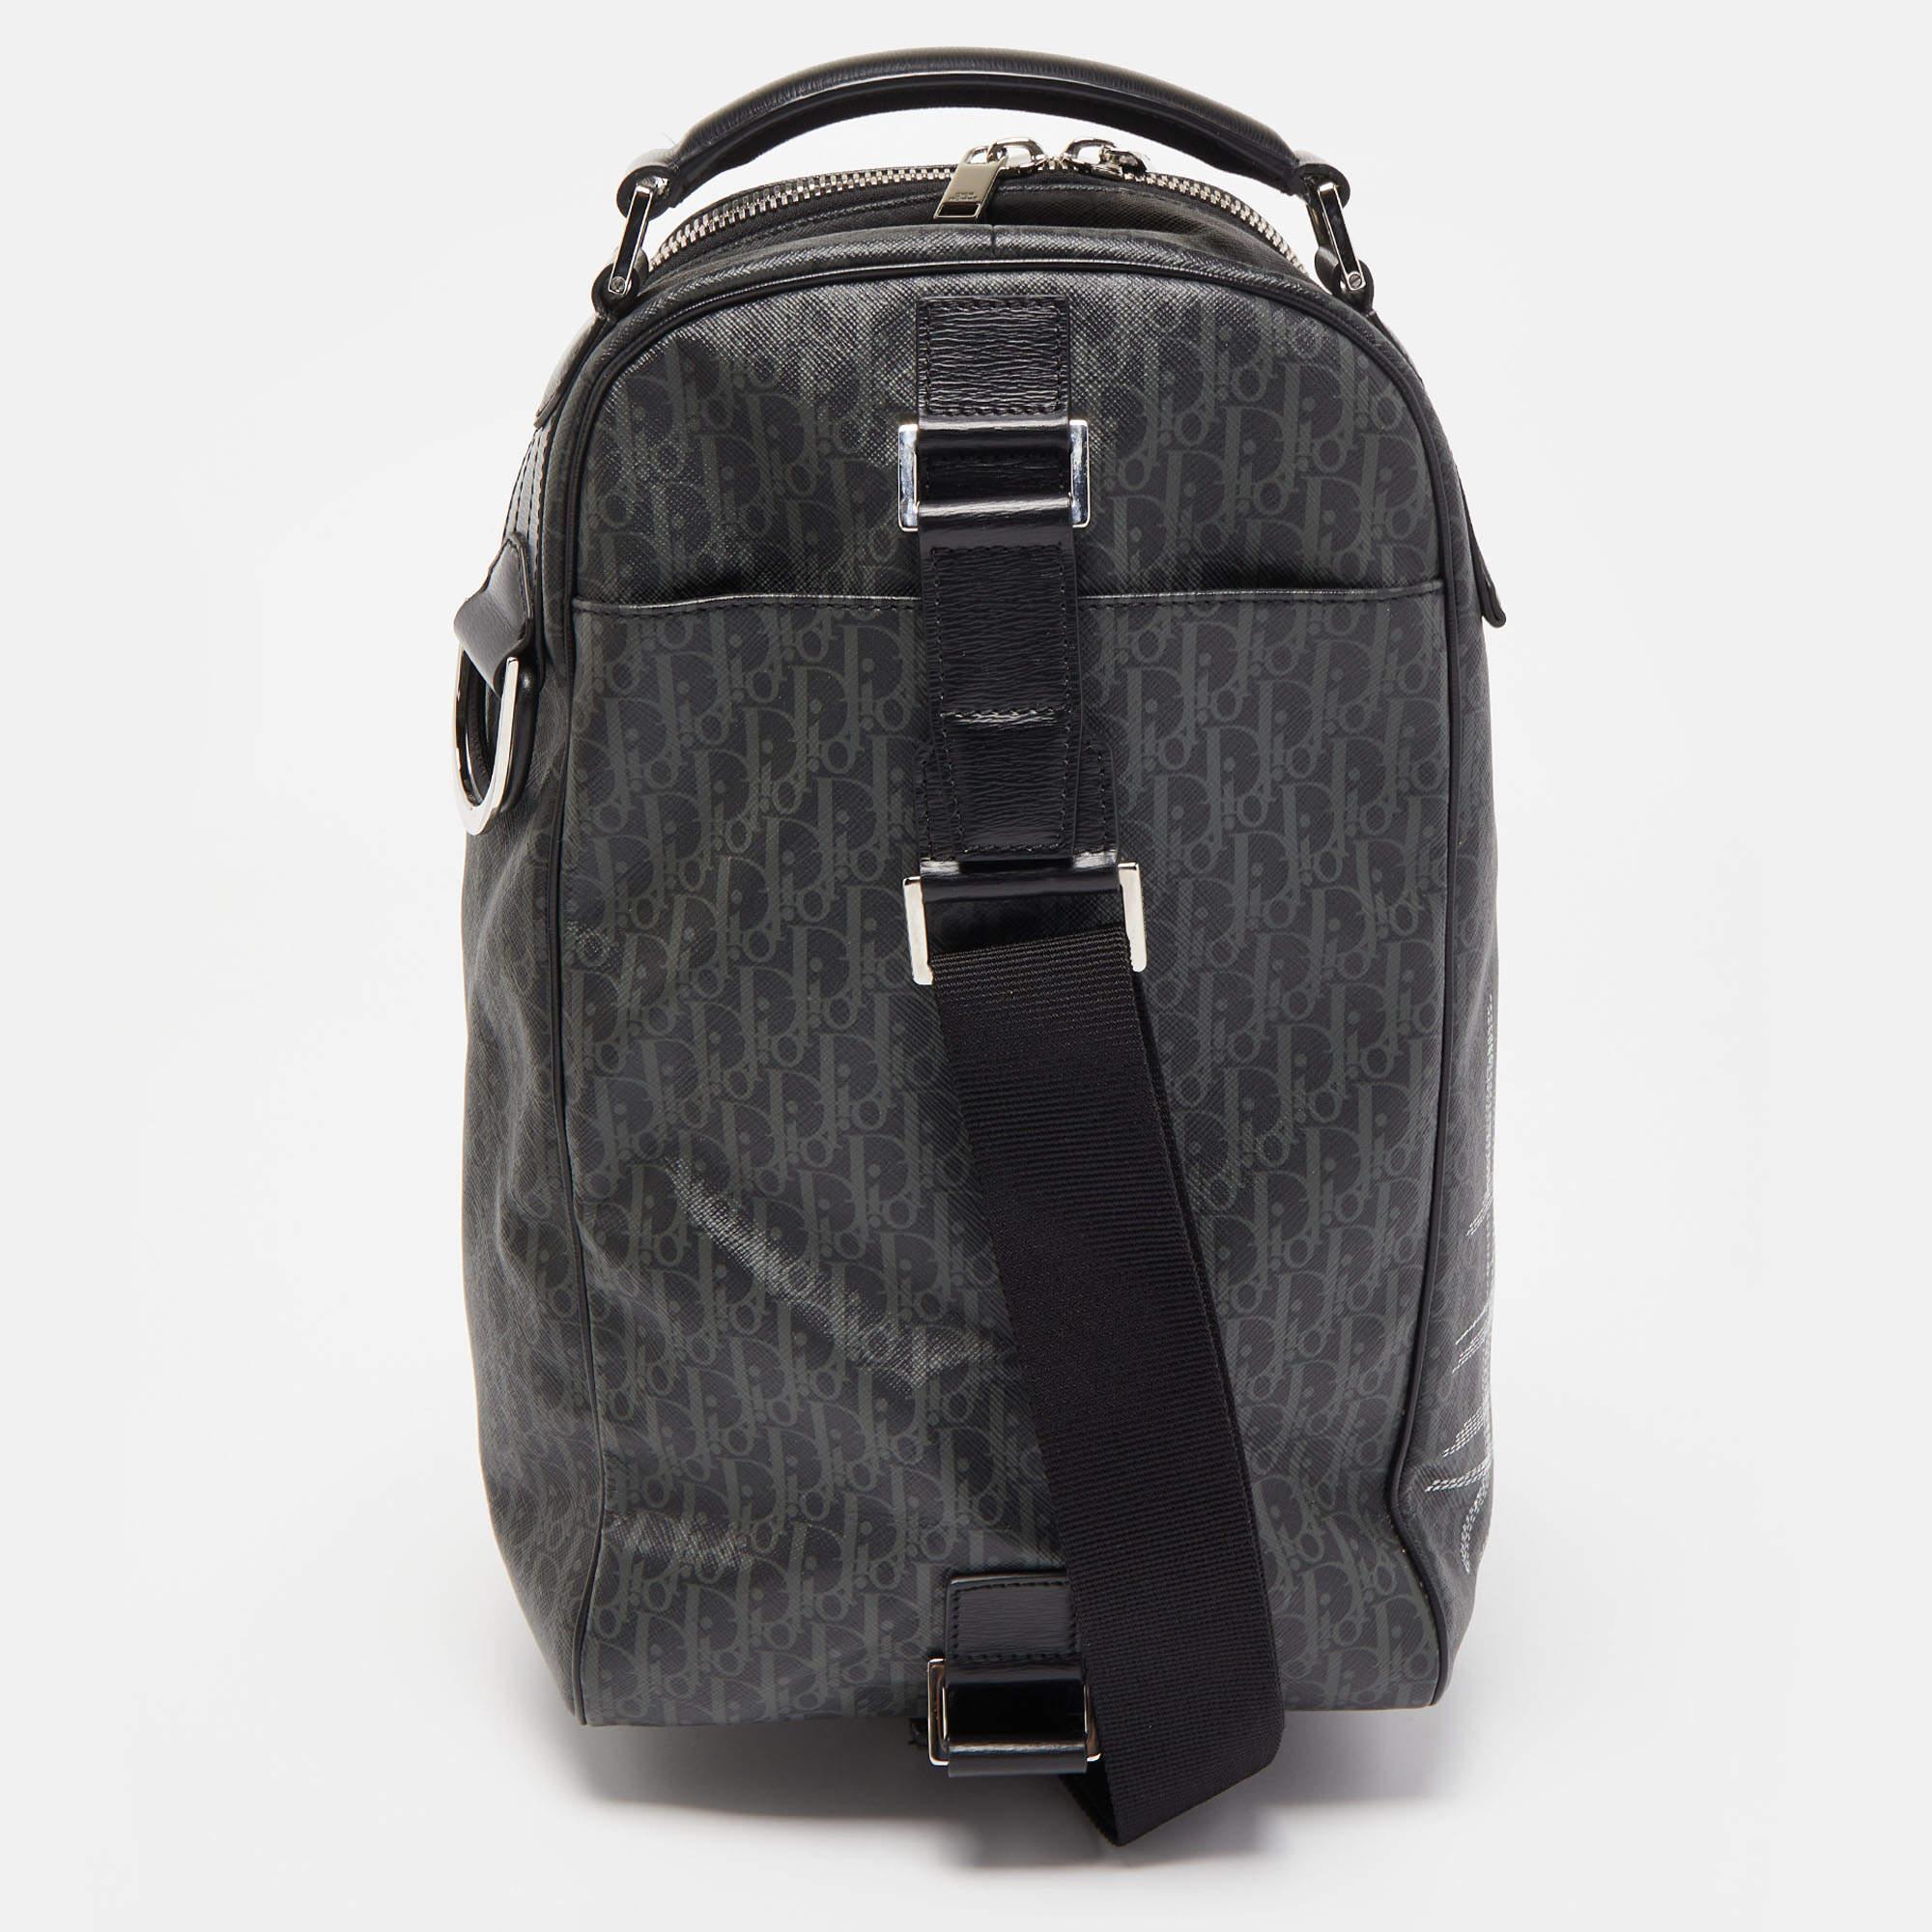 The Dior Homme bag is a stylish accessory. Its dark grey color and distinctive stitched print add a touch of sophistication. Made from coated canvas, it features a sling design, making it versatile and easy to carry. Perfect for the fashion-forward